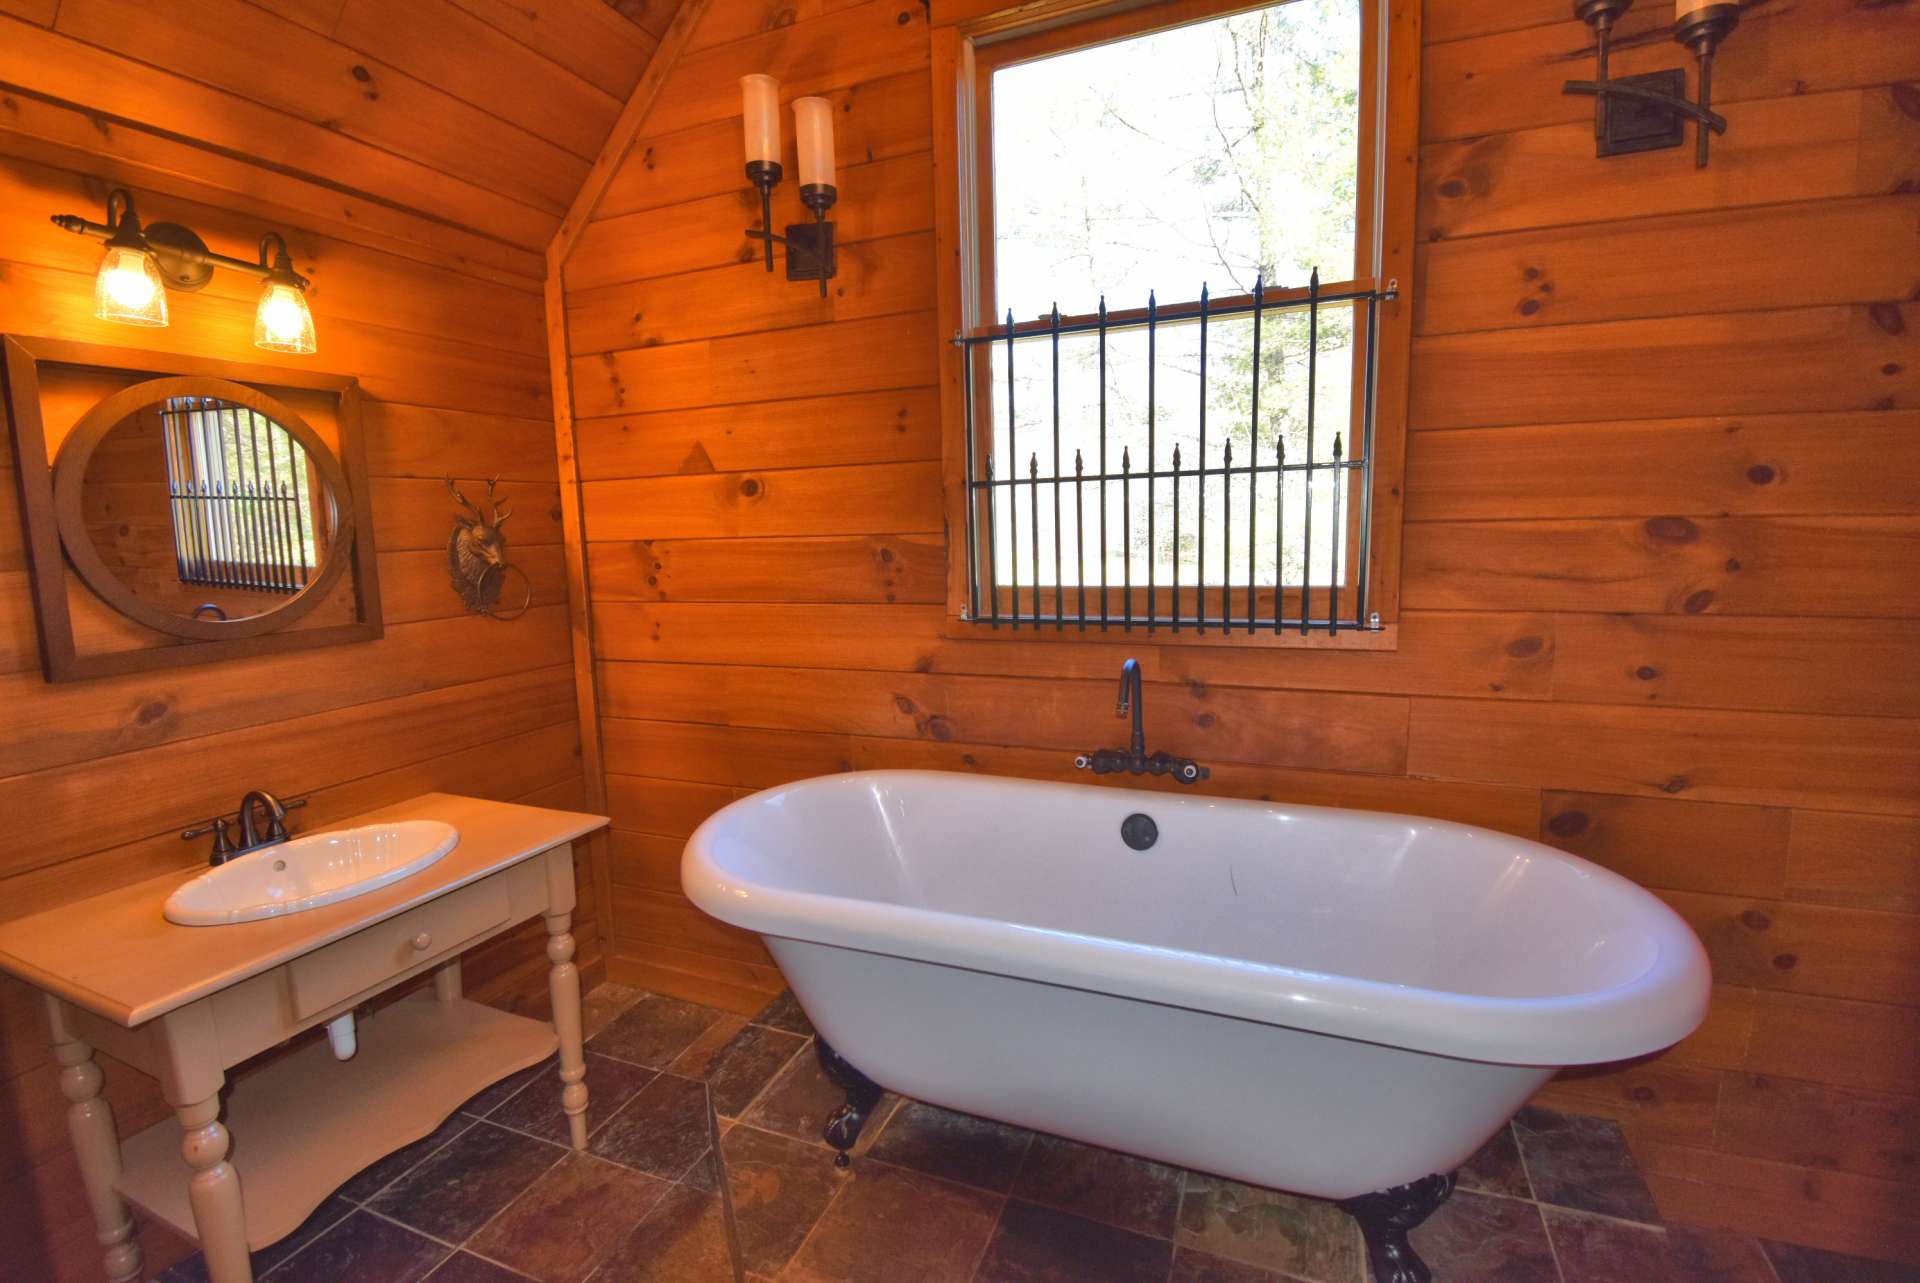 The upper level bath features a clawfoot tub and other custom details to enhance the cabin feel.